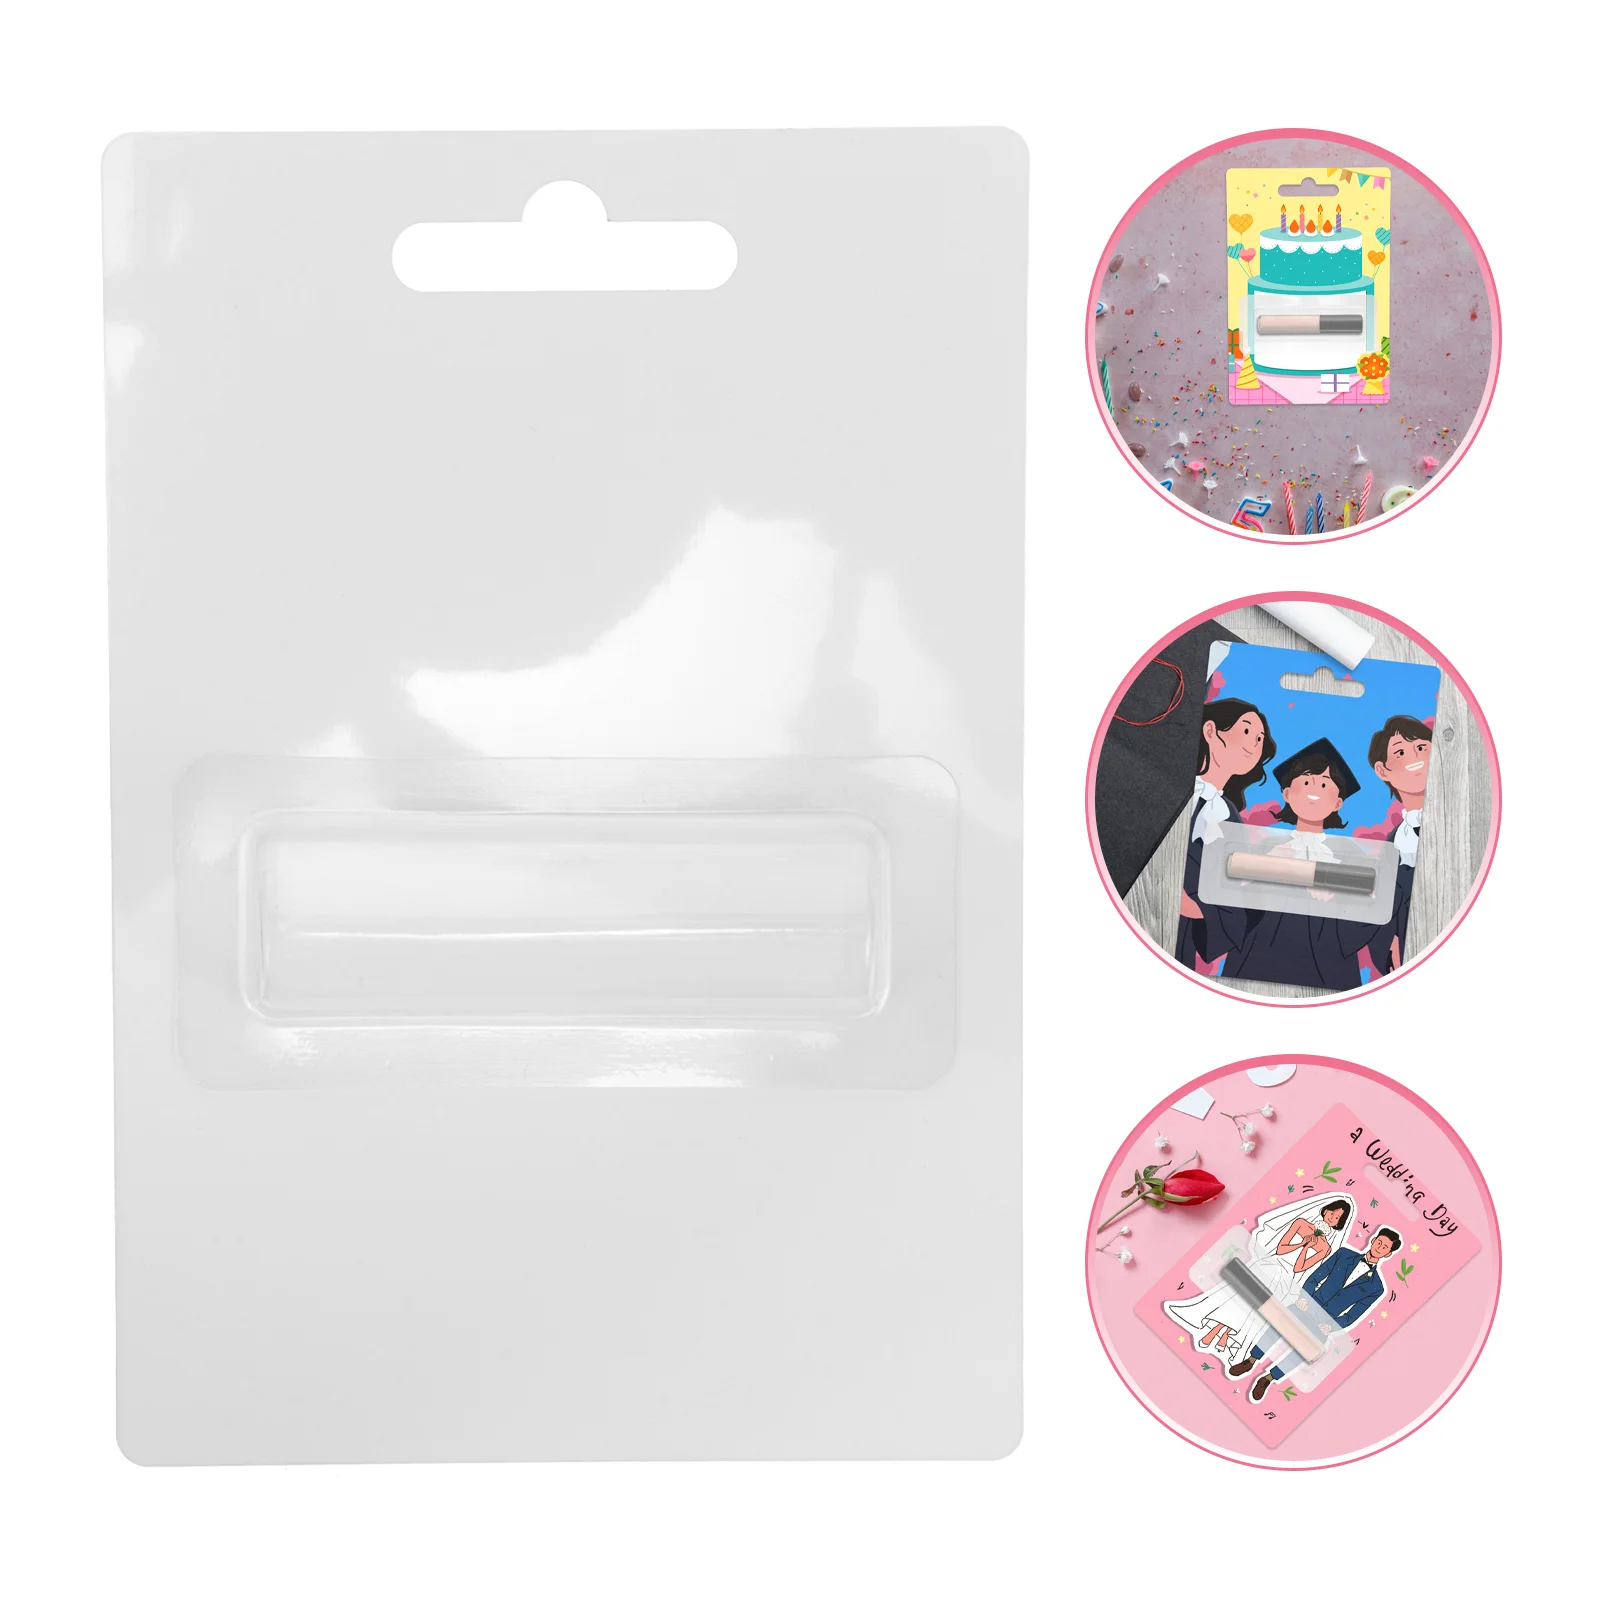 Money Card Blank Cards Bulk Sublimation Graduation Blanks Lip Balm Pouches for Blessing Holder Small Gift Party Message